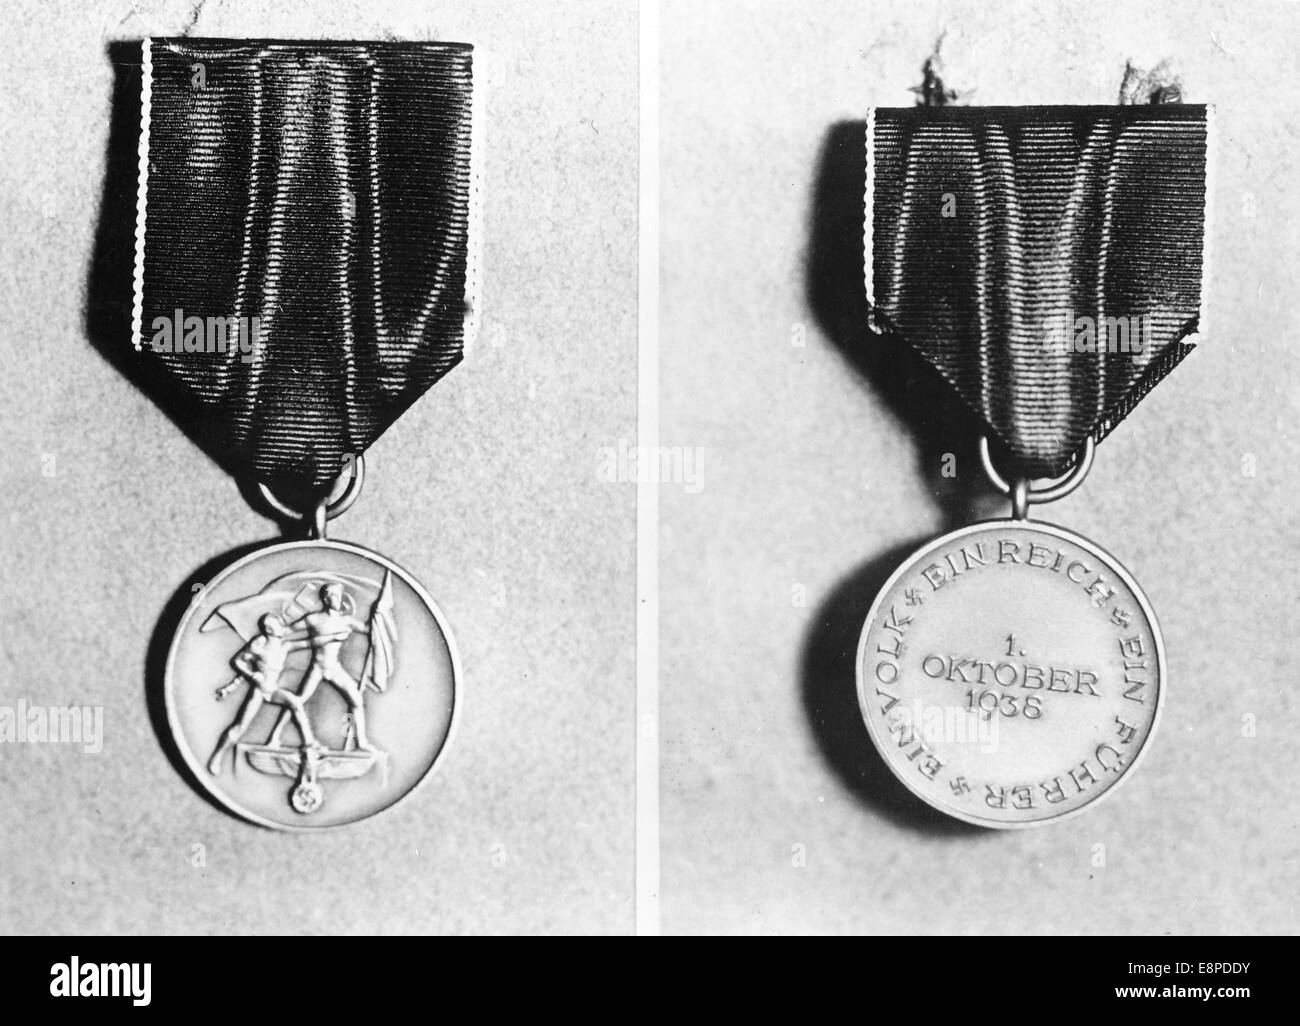 The Nazi propaganda picture shows the medal from October 1938 to commemorate the 'return of the Sudetenland' in November, 1938, location unknown. The original text from a Nazi news report on the back of the picture reads: 'A medal to commemorate the October 1, 1938. Thanks for the return of the Sudetenland. The Fuhrer and Reich Chancellor founded the 'Medal to Commemorate October 1, 1938' on 18 October 1938 as an expression of recognition and thanks for the services towards the reunification of the Sudeten territories with the German Reich. Out picture shows: the front (L) and back sides of th Stock Photo